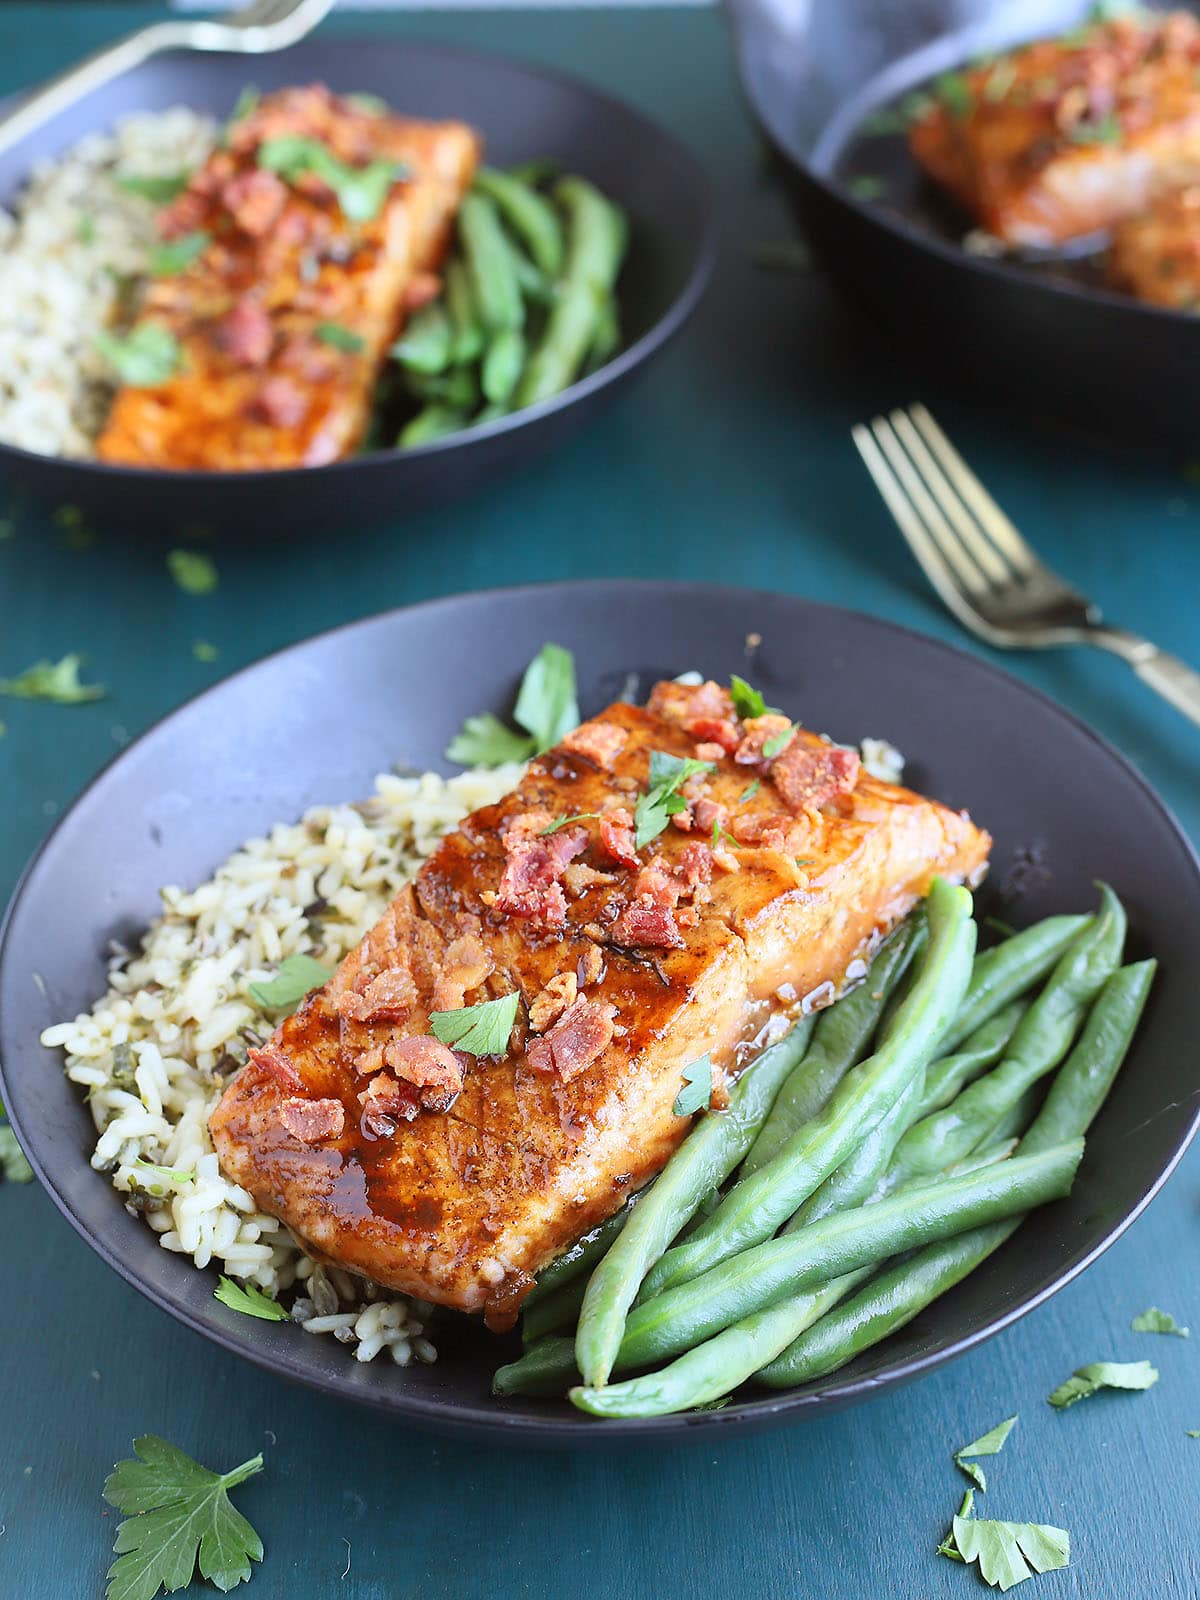 a glazed salmon filet on a bed of rice and fresh green beans in a black bowl